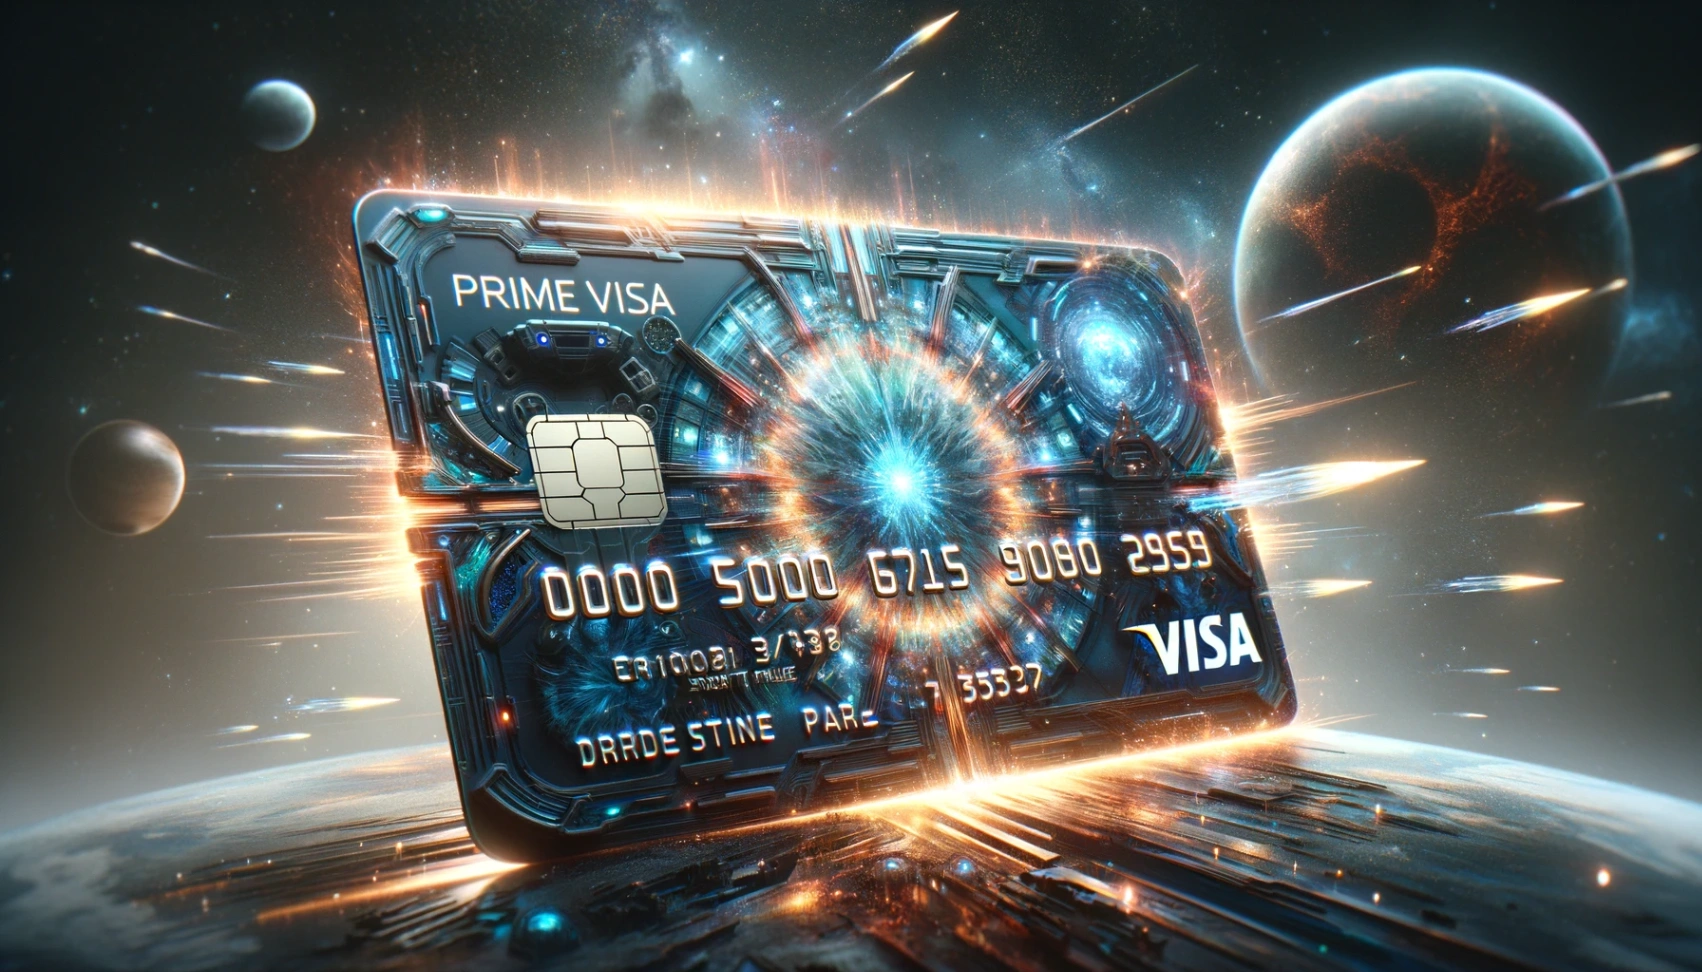 Prime Visa Credit Card - Learn How to Apply